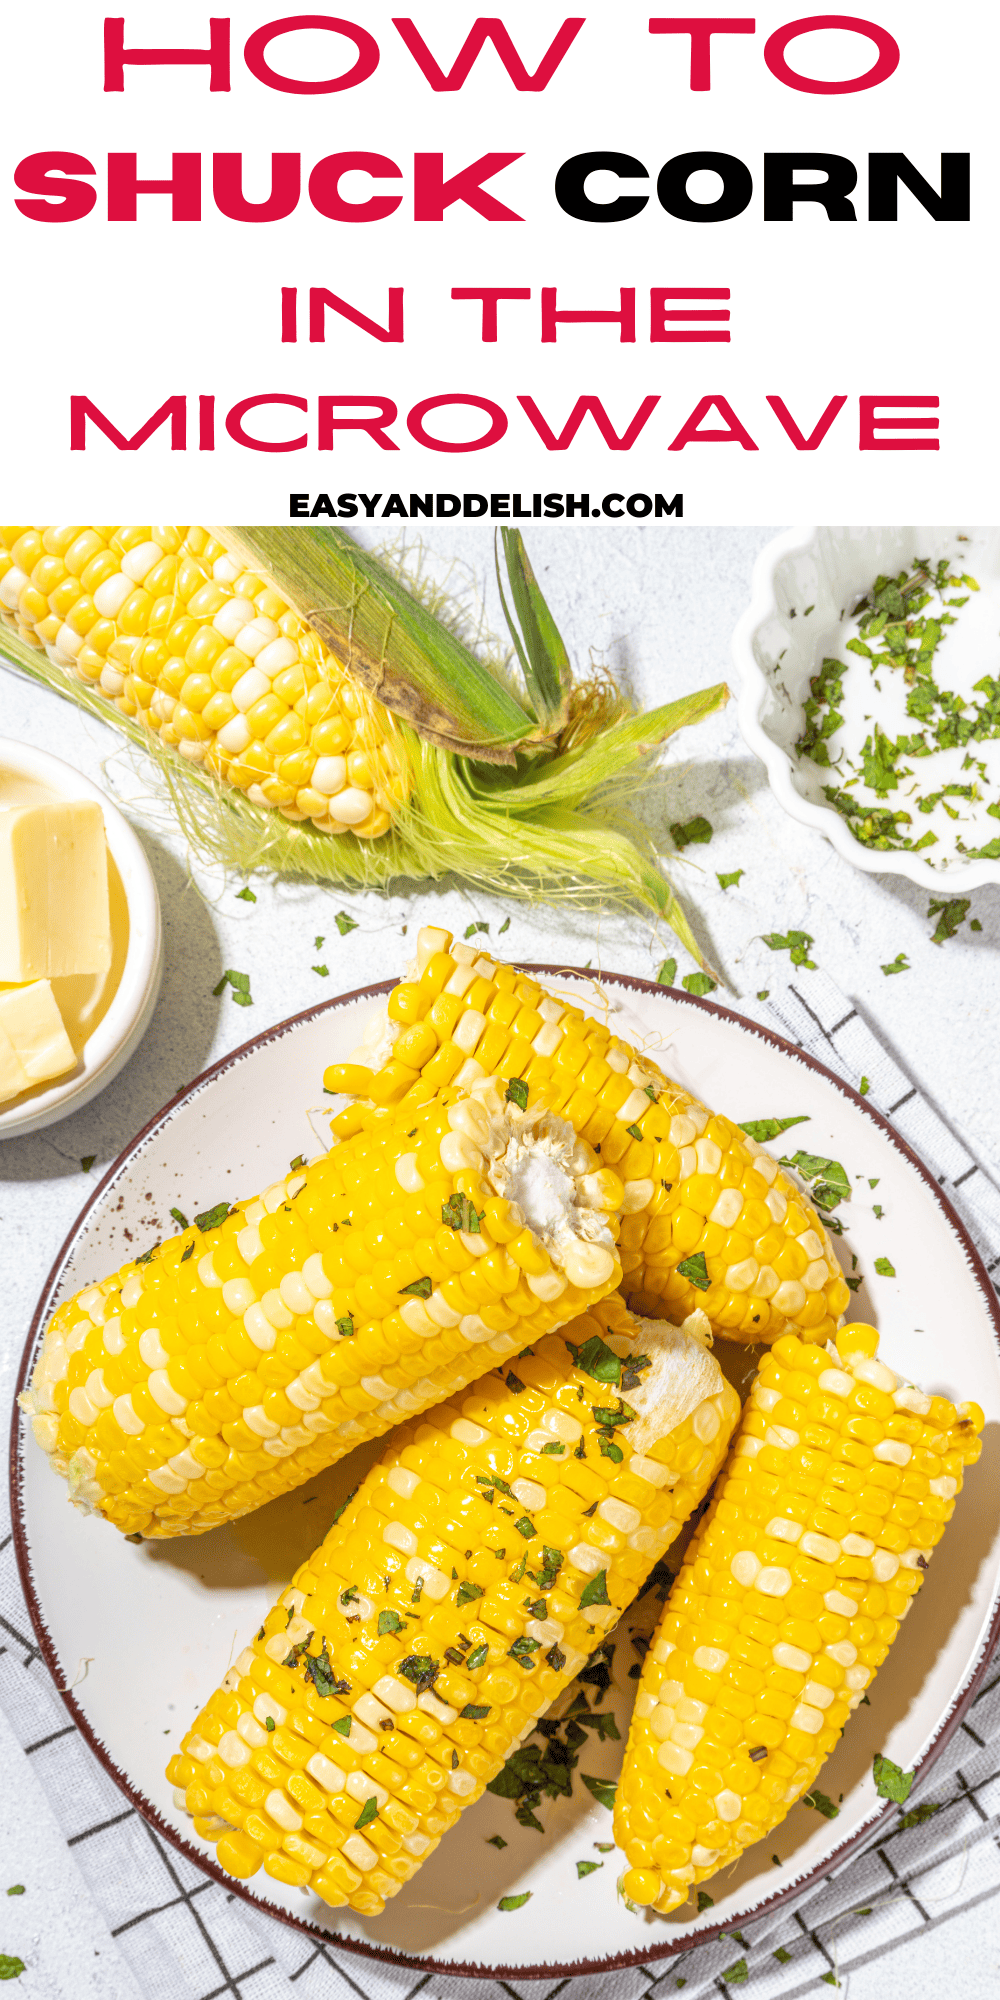 pin showing unshucked and also shucked and cooked ears of corn on the cob in a plate.